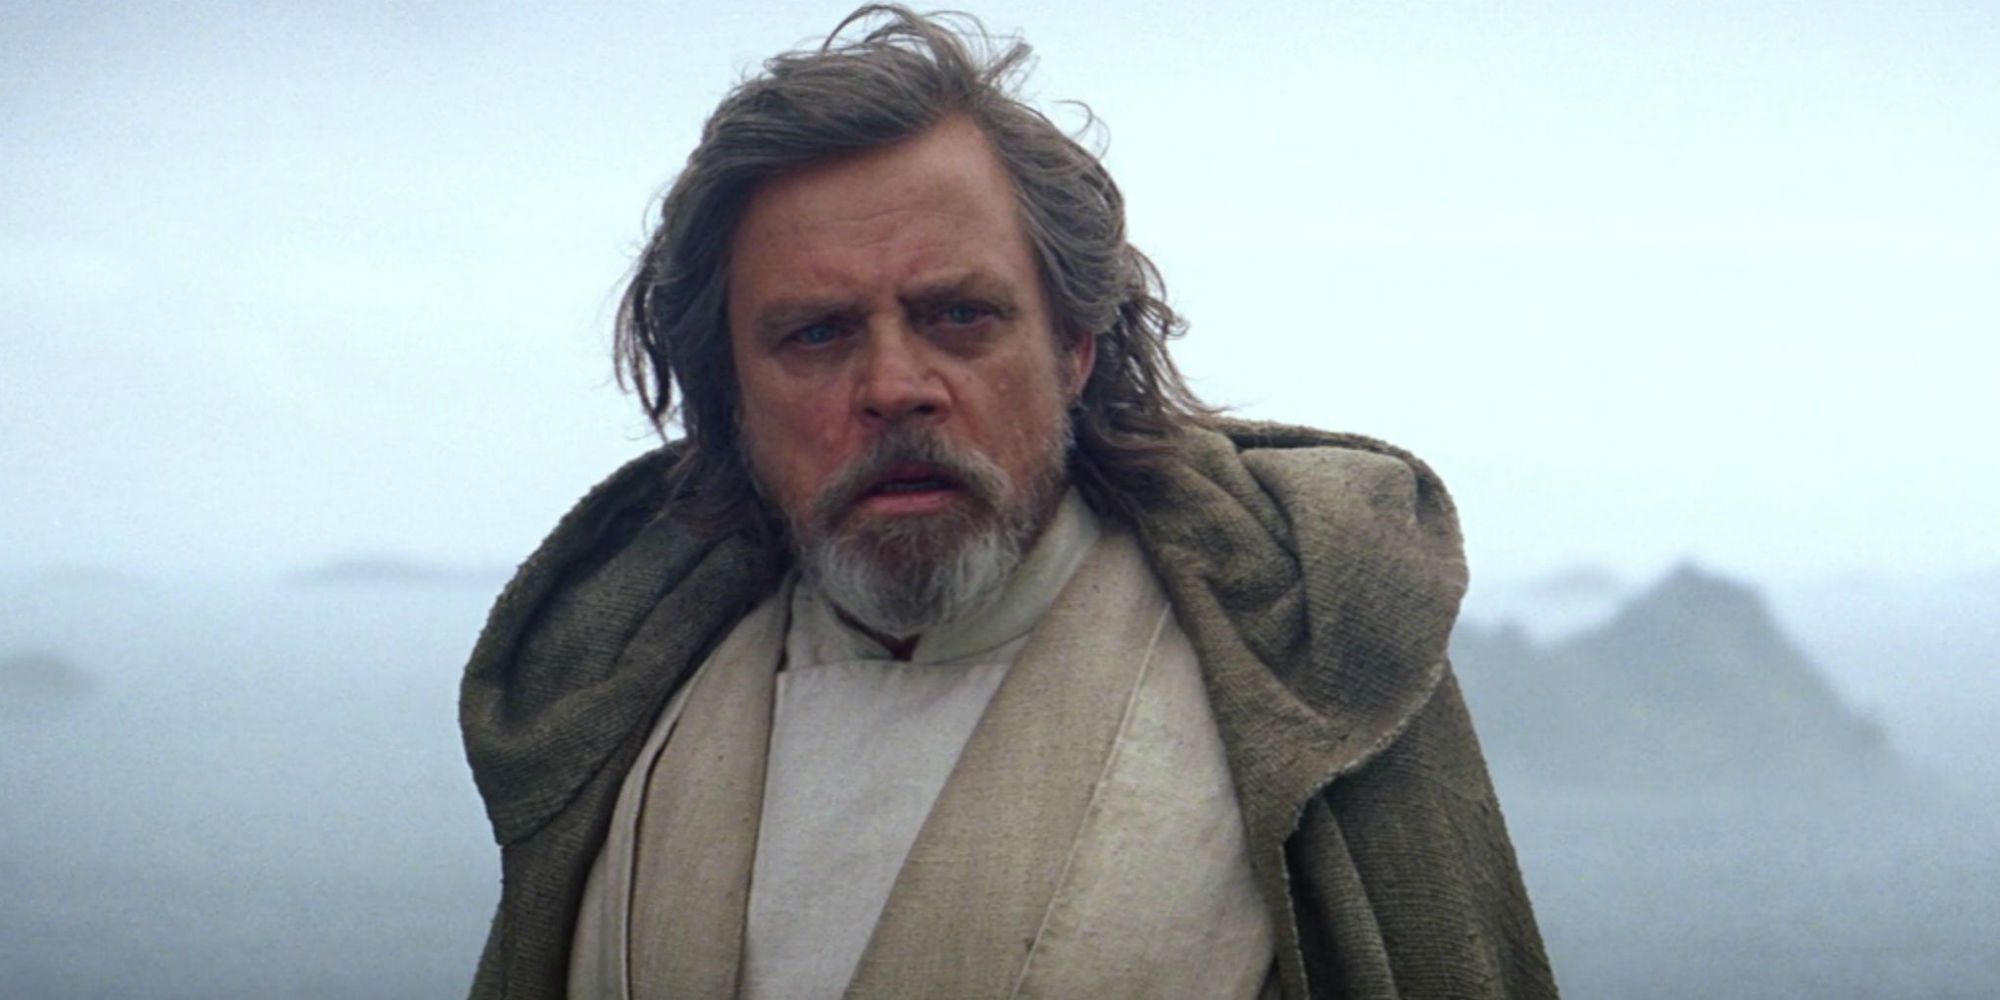 Luke stands on a hill in Star Wars The Force Awakens